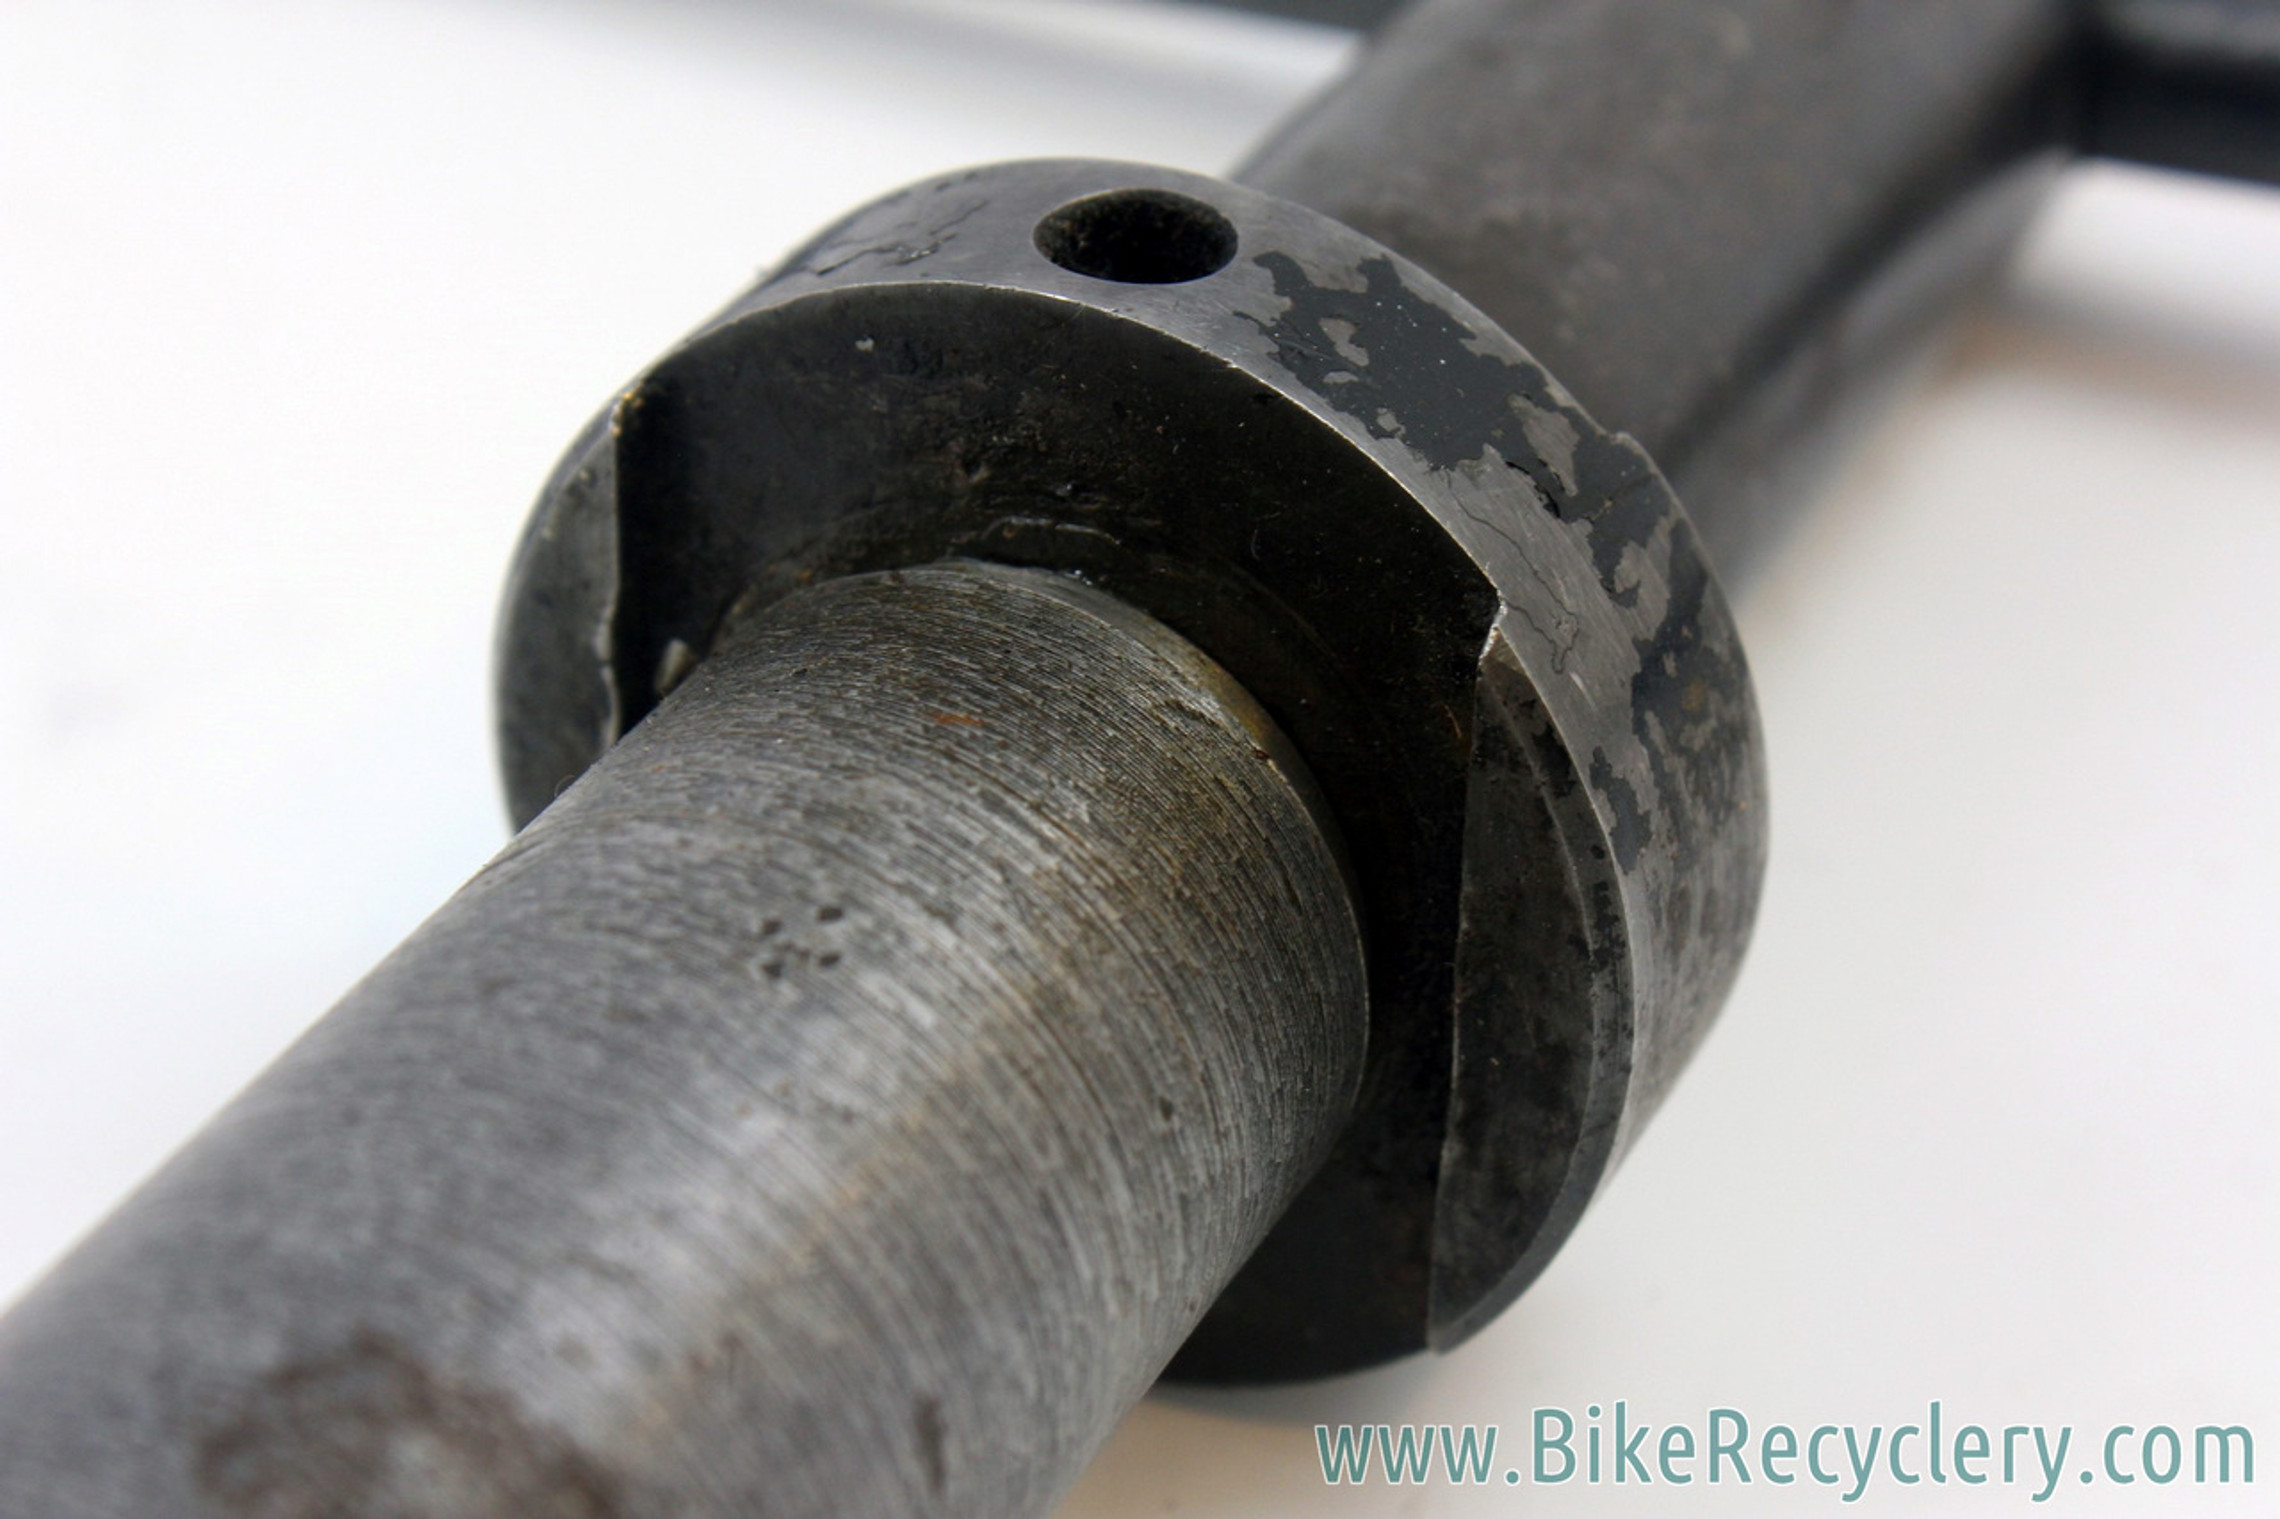 VAR 30 Bottom Bracket Fixed Cup Remover Tool: with 30/2 for Stronglight -  Bike Recyclery